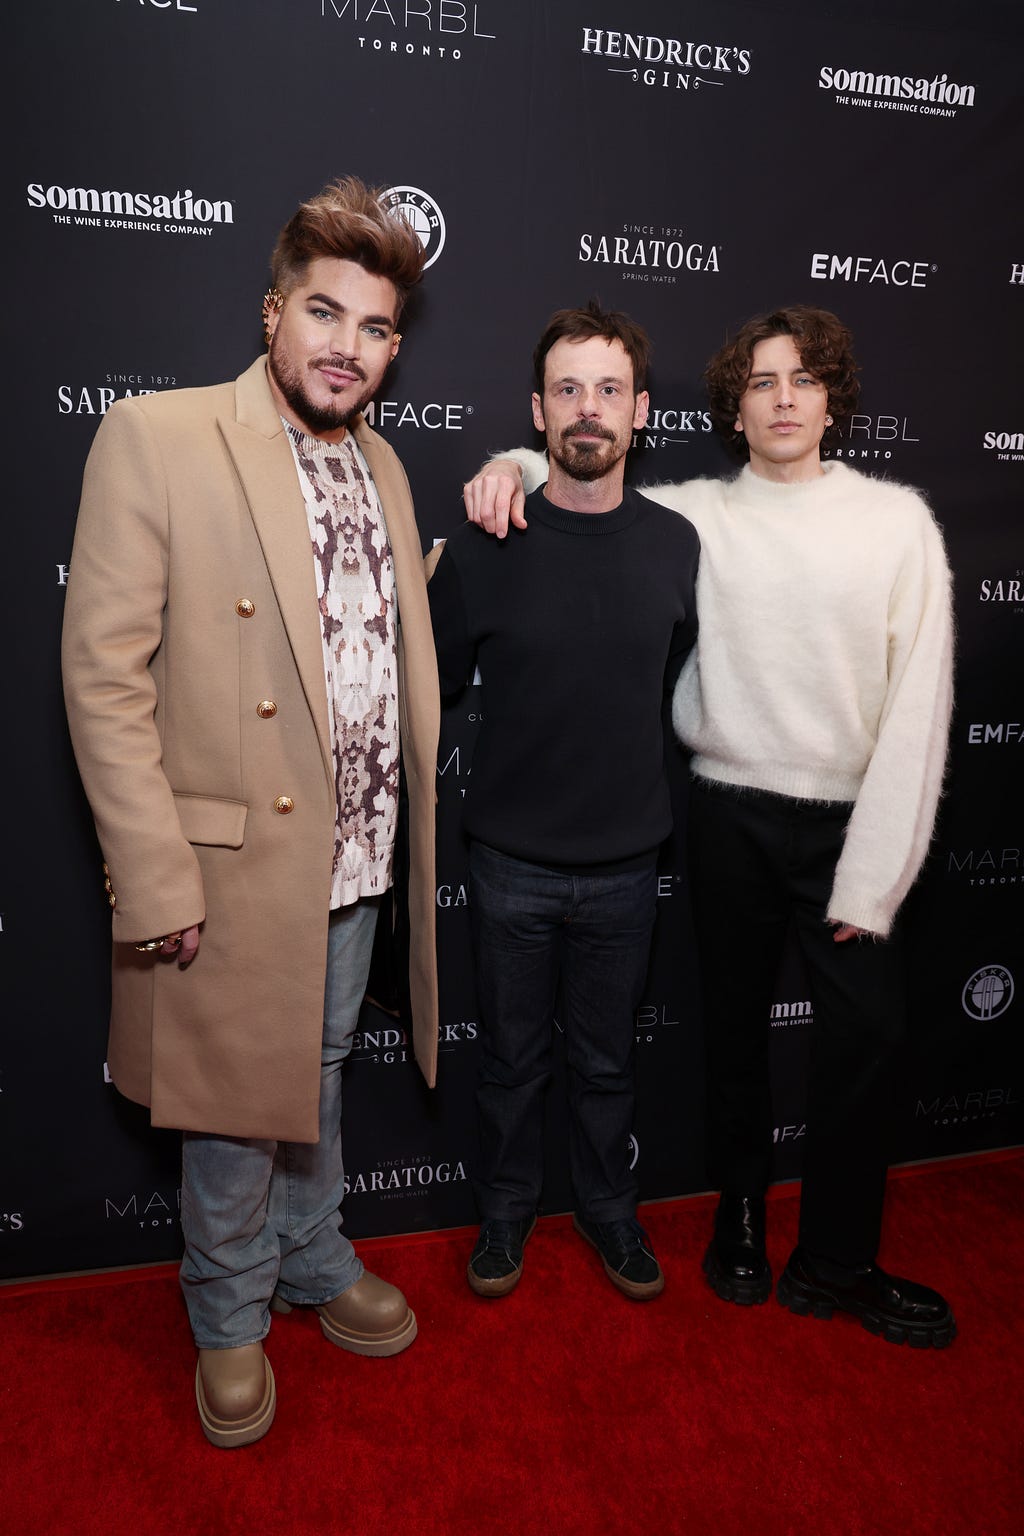 (l.-r.) Adam Lambert, Scoot McNairy, and Cody Fern at FAIRYLAND post-premiere party at Zooz Cinema Center, sponsored by Sommsation. Photo by Mark Von Holden.